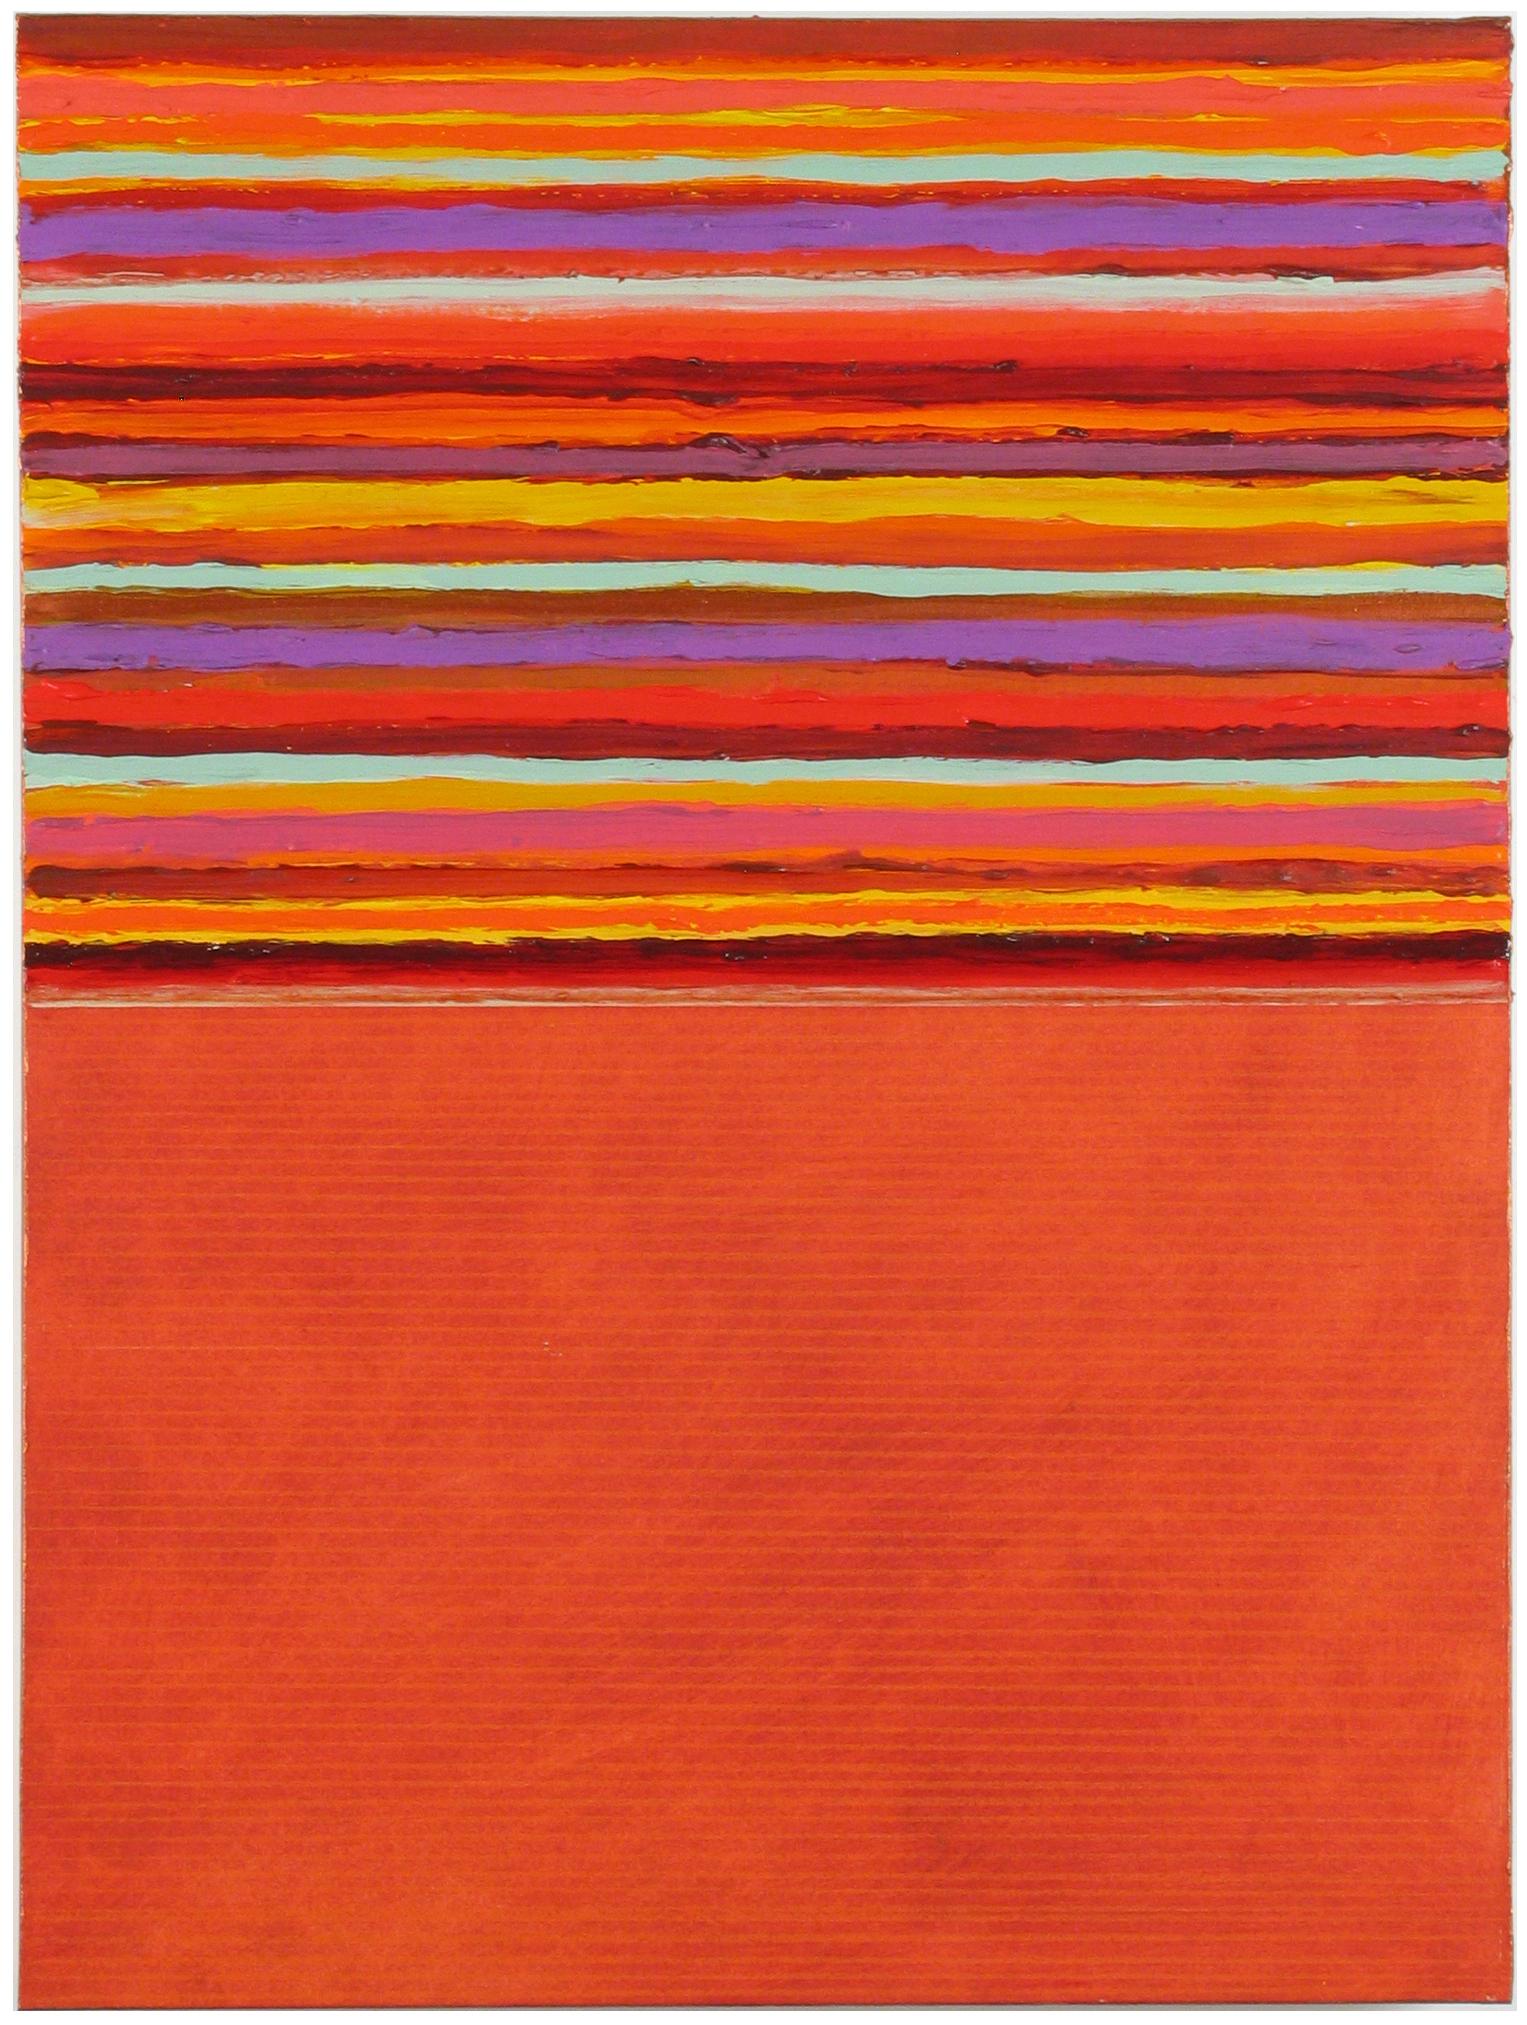 A multicolored painting with bright yellow, aqua, burgundy and light violet stripes against a vivid orange background. 

Joanne Mattera’s paintings can be described as lush minimalism, the work is chromatically rich and compositionally